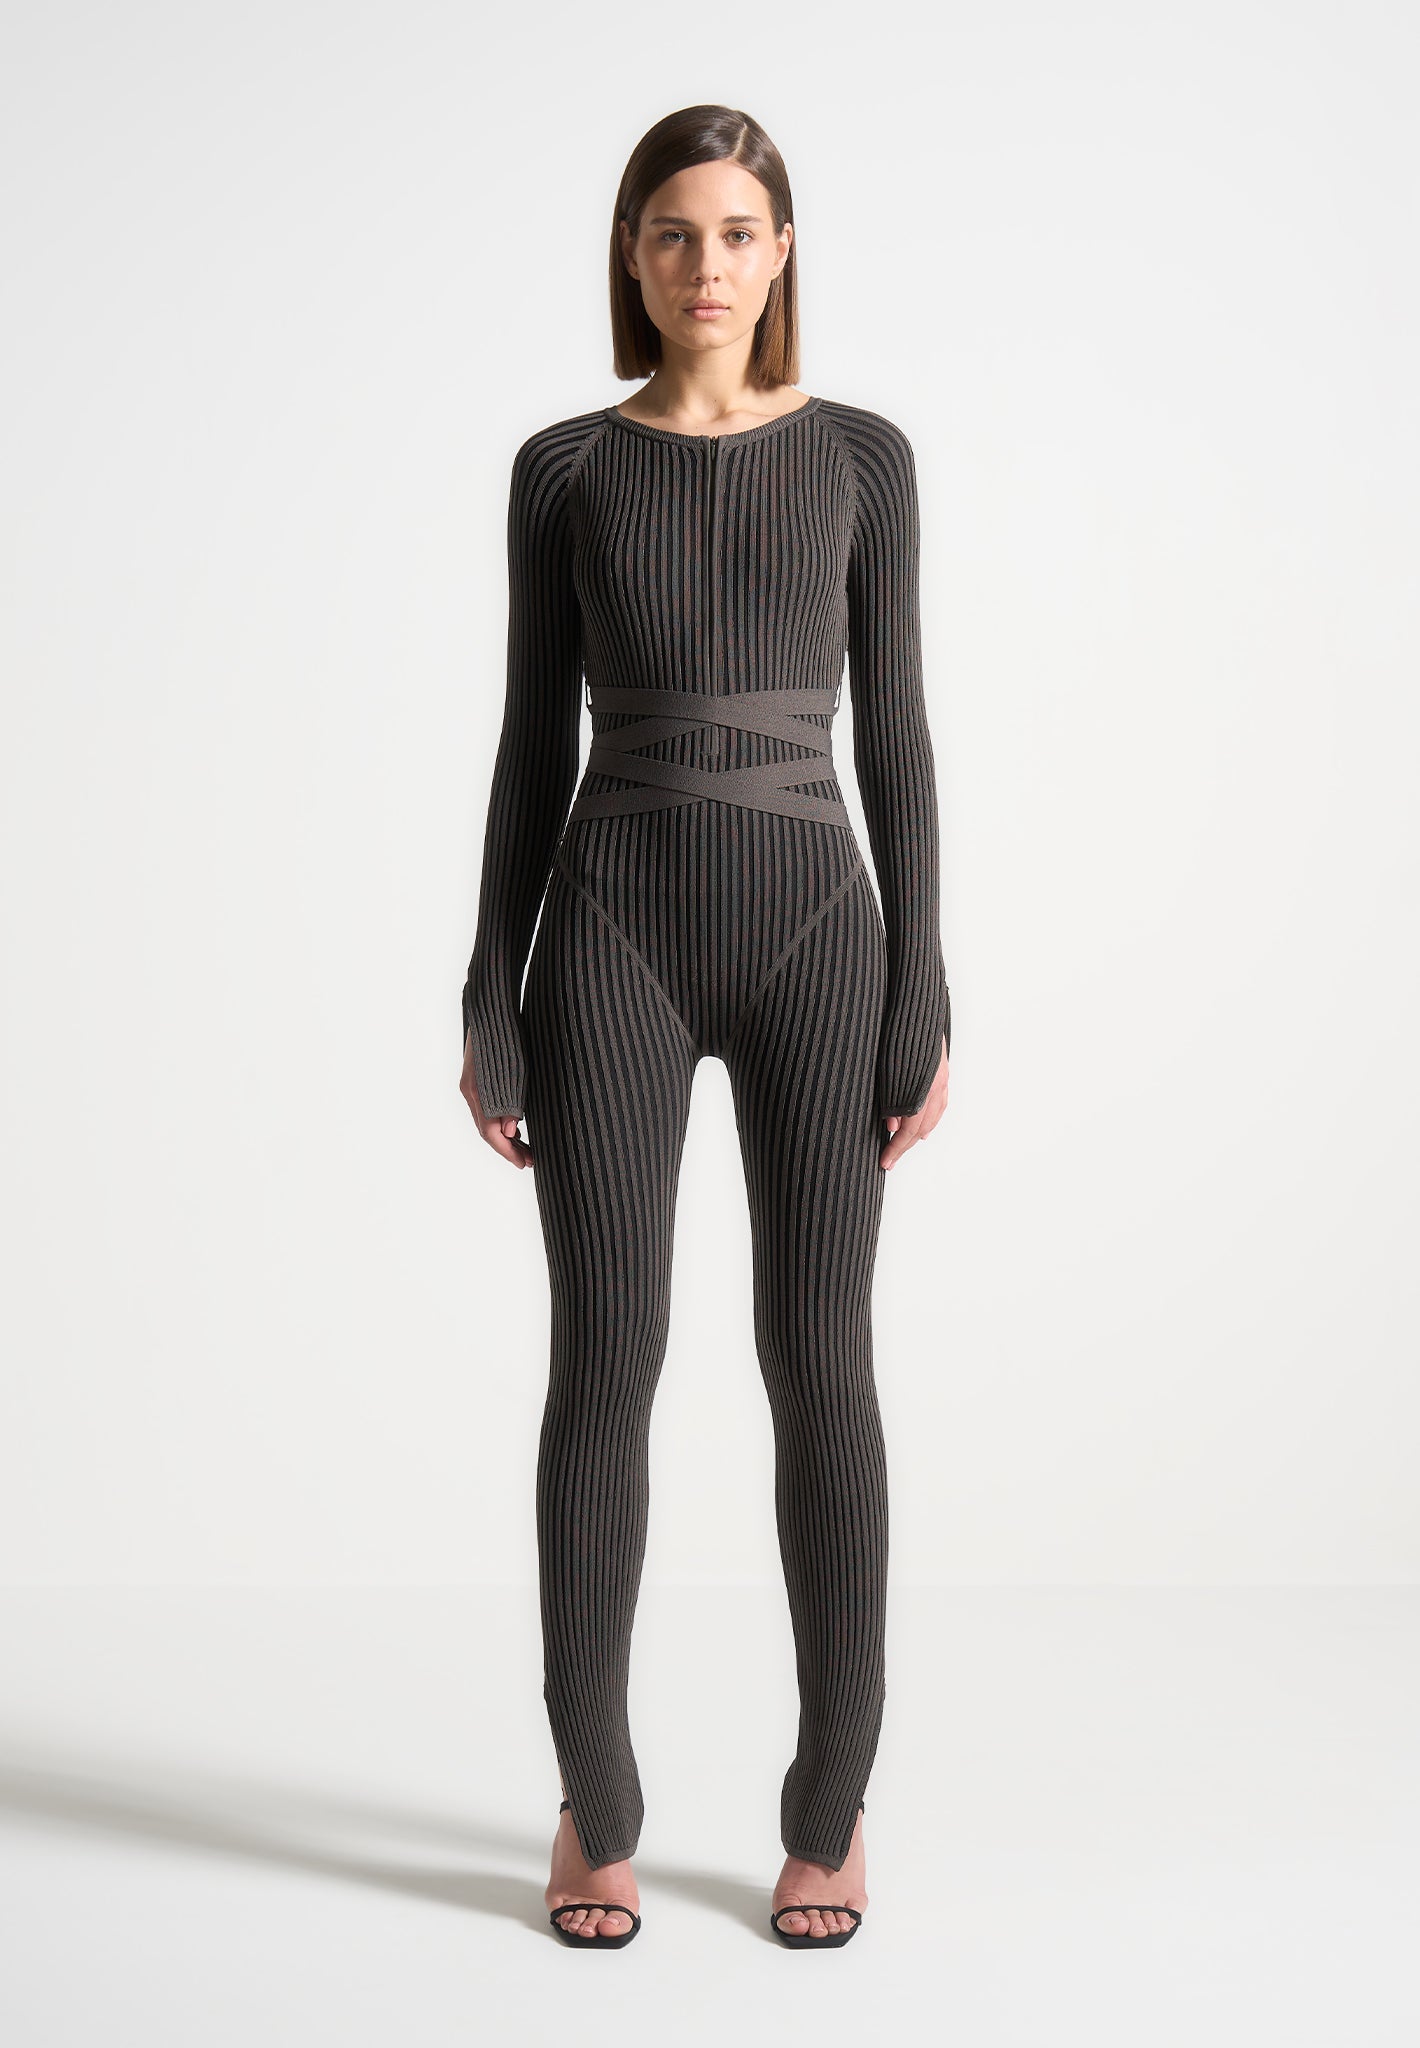 knitted-two-tone-jumpsuit-with-belt-grey-black